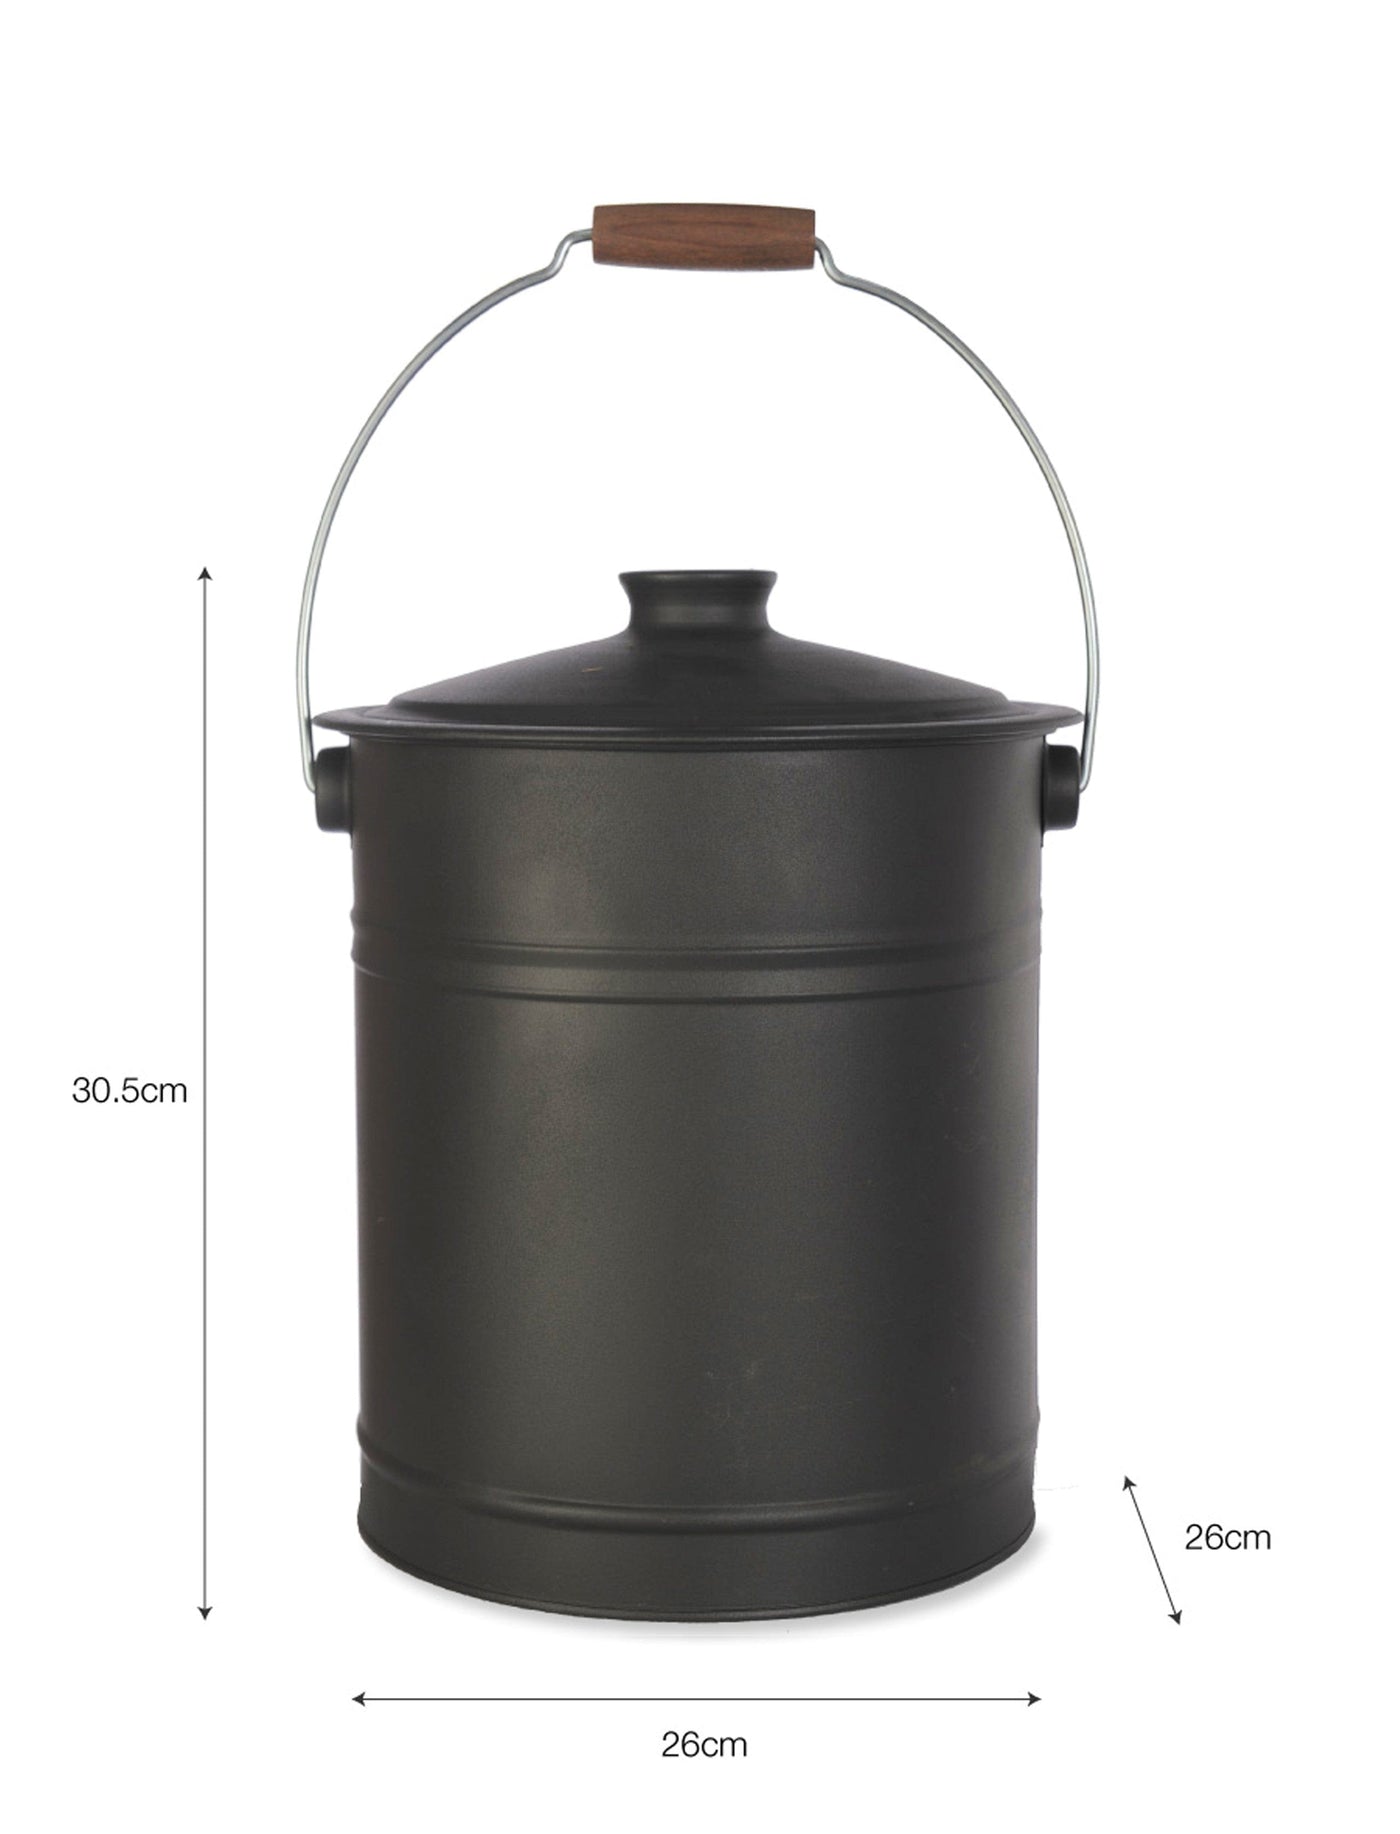 Garden Trading Living Forge Fire Bucket House of Isabella UK